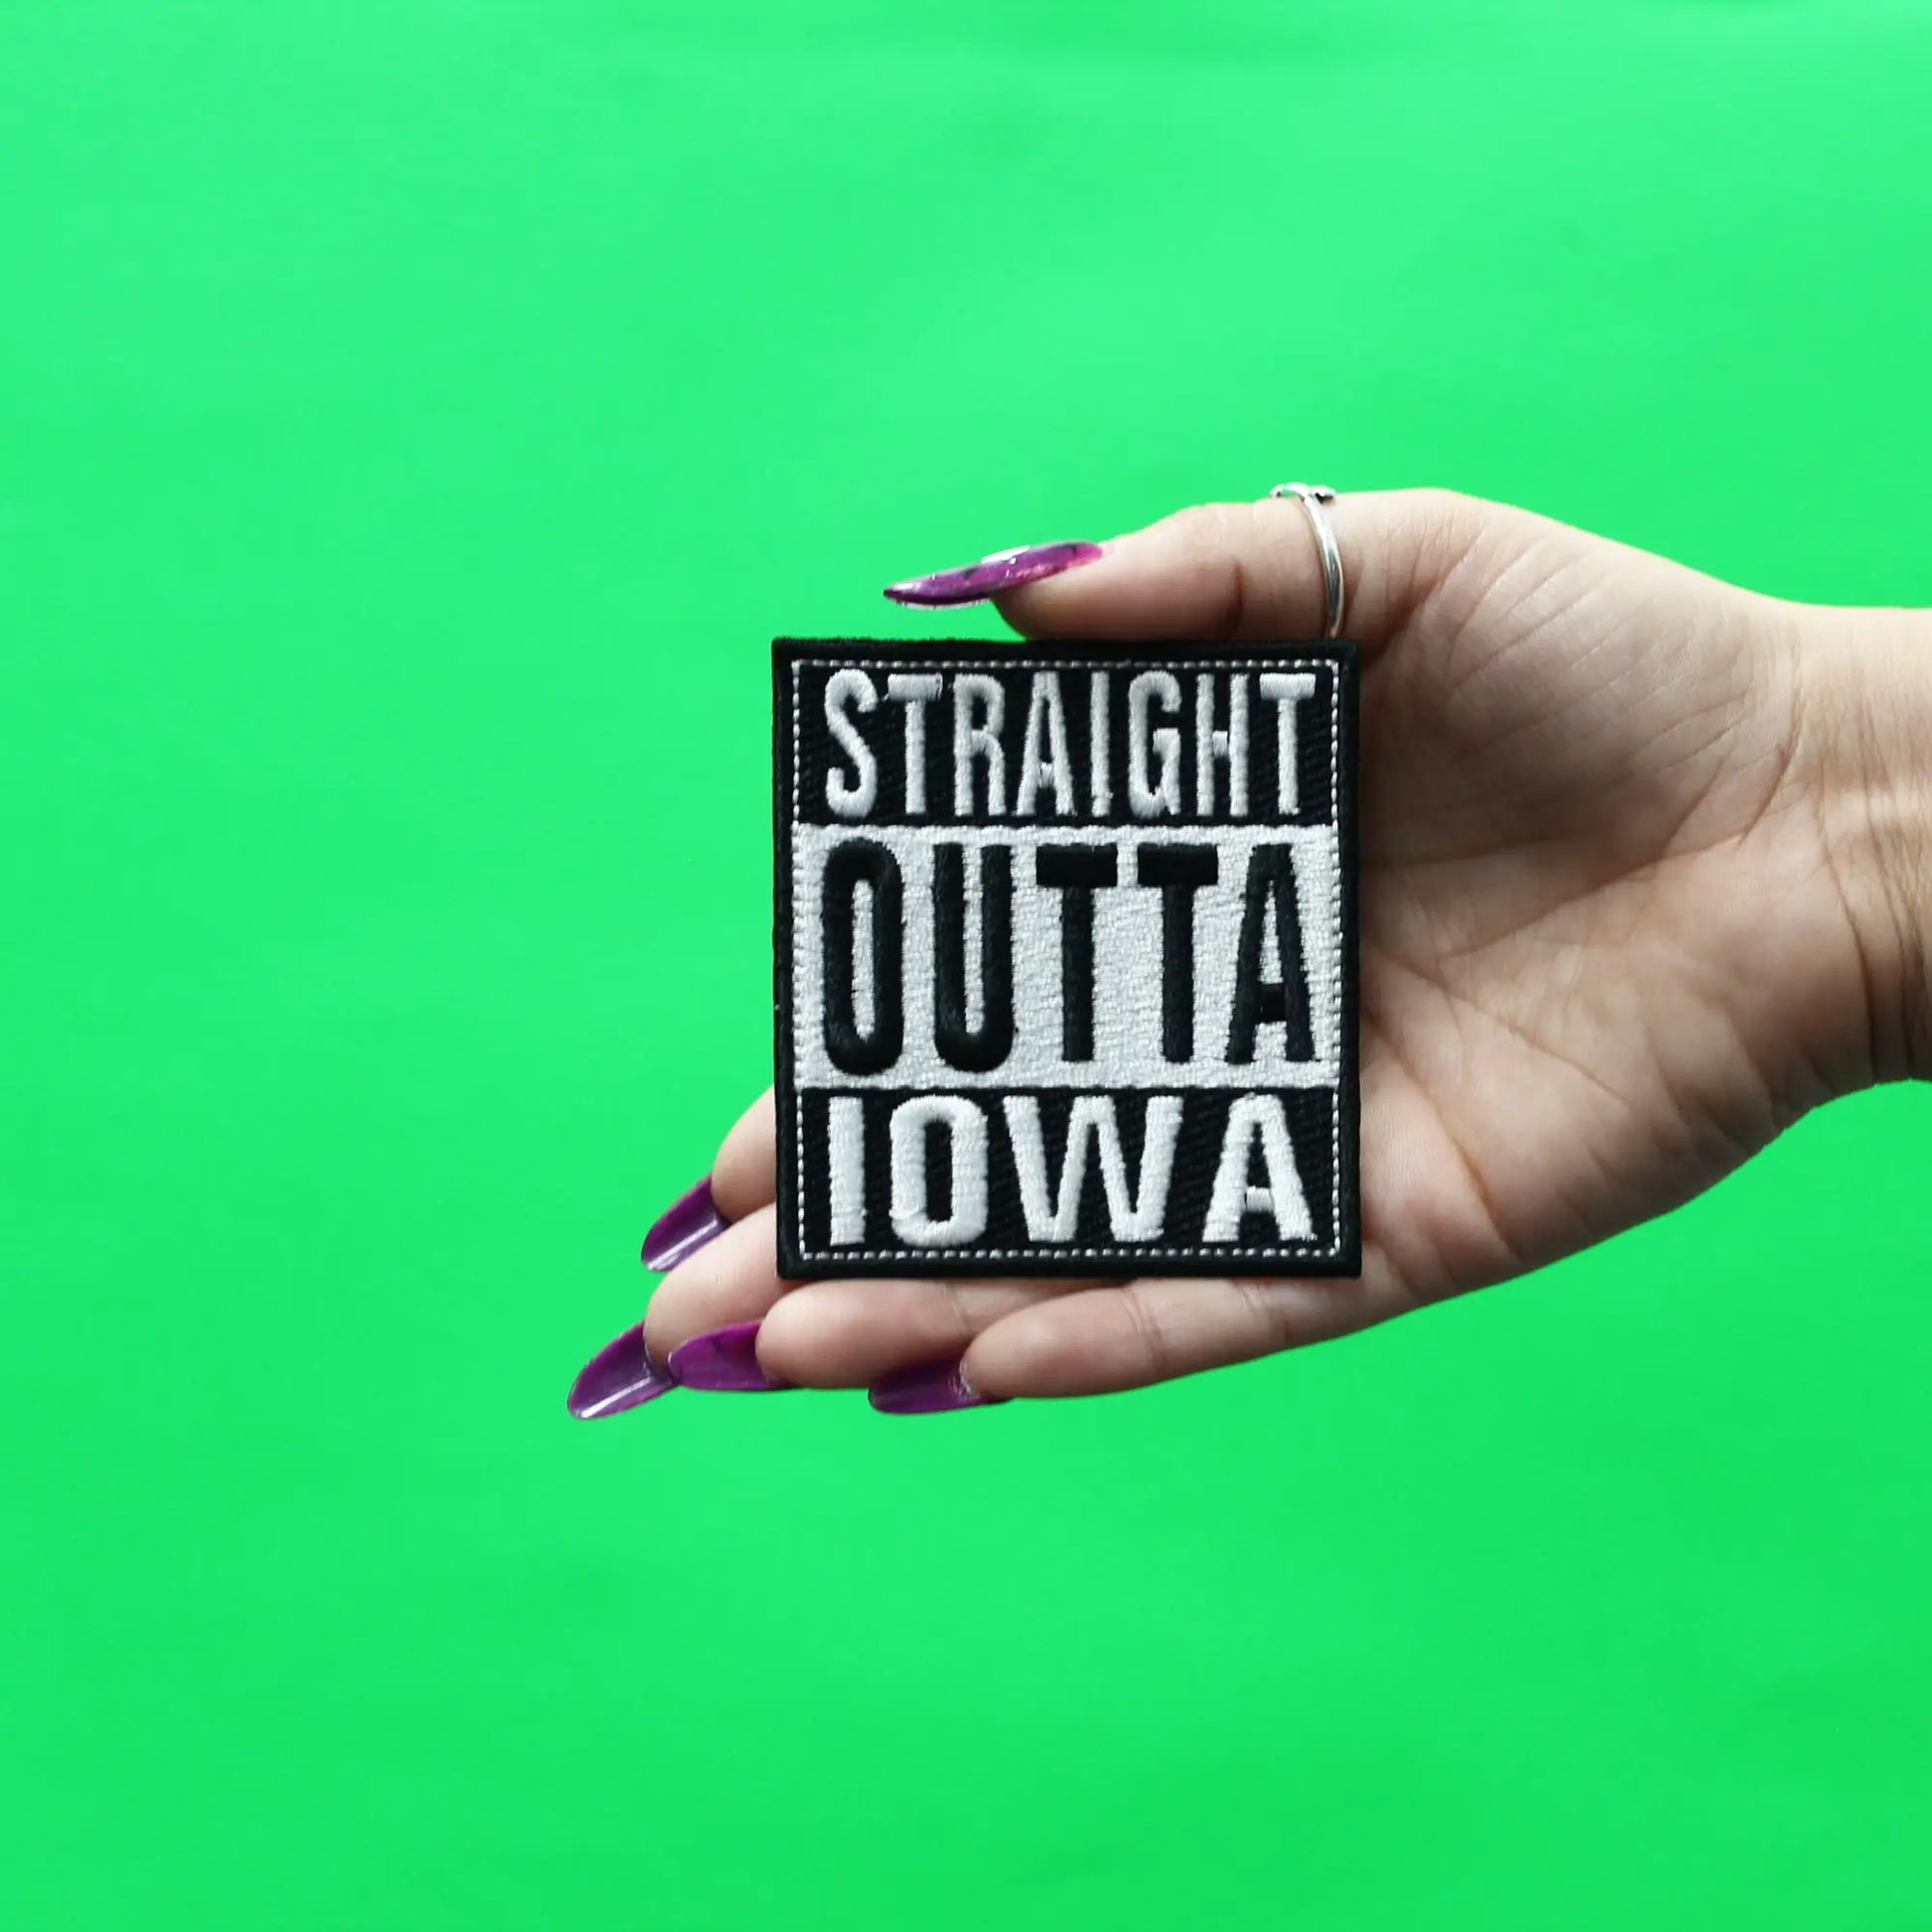 Straight Outta Iowa Patch Embroidered Iron On 